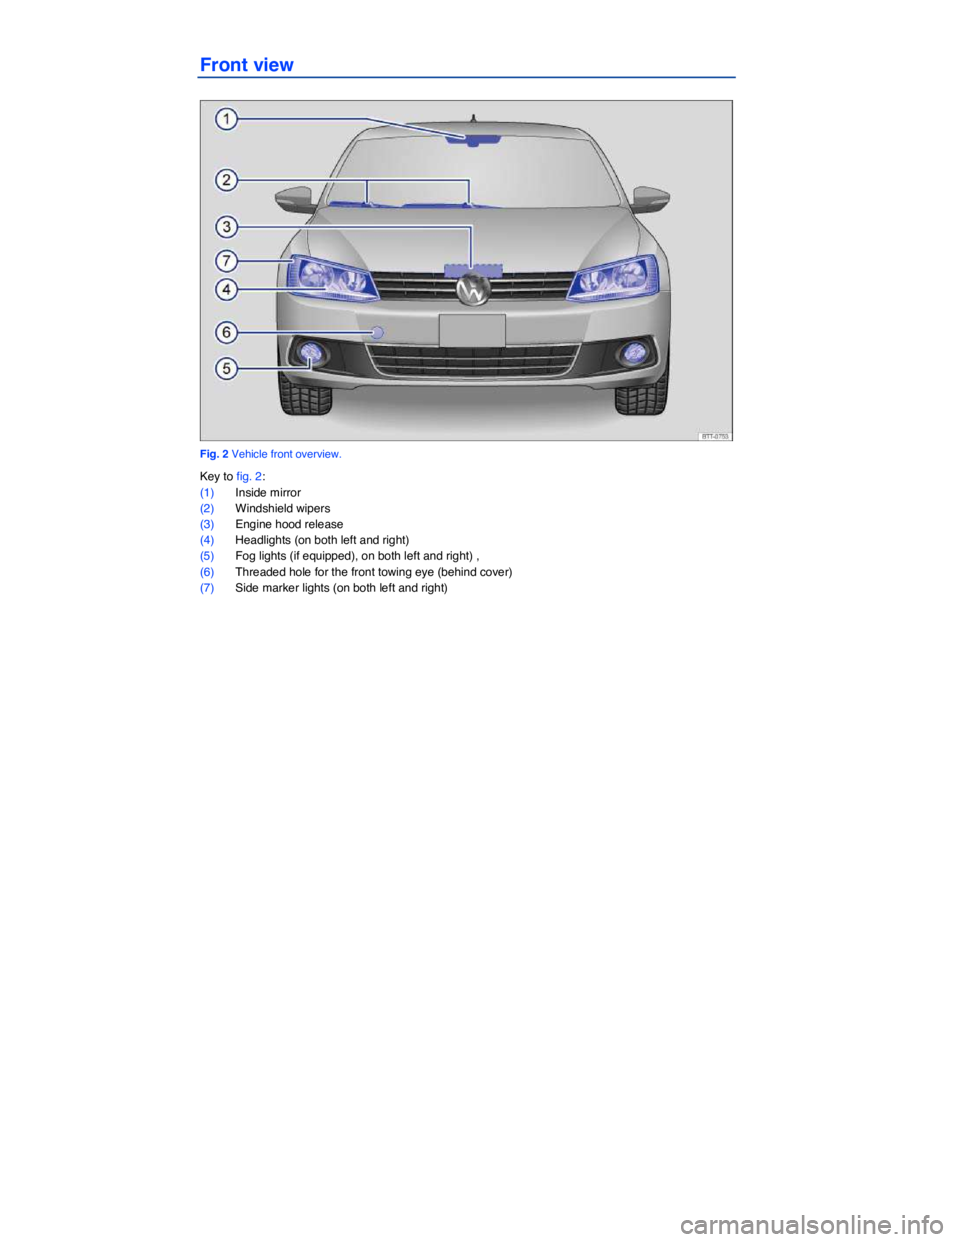 VOLKSWAGEN JETTA 2012  Owners Manual  
Front view 
 
Fig. 2 Vehicle front overview. 
Key to fig. 2: 
(1) Inside mirror  
(2) Windshield wipers  
(3) Engine hood release  
(4) Headlights (on both left and right)  
(5) Fog lights (if equip